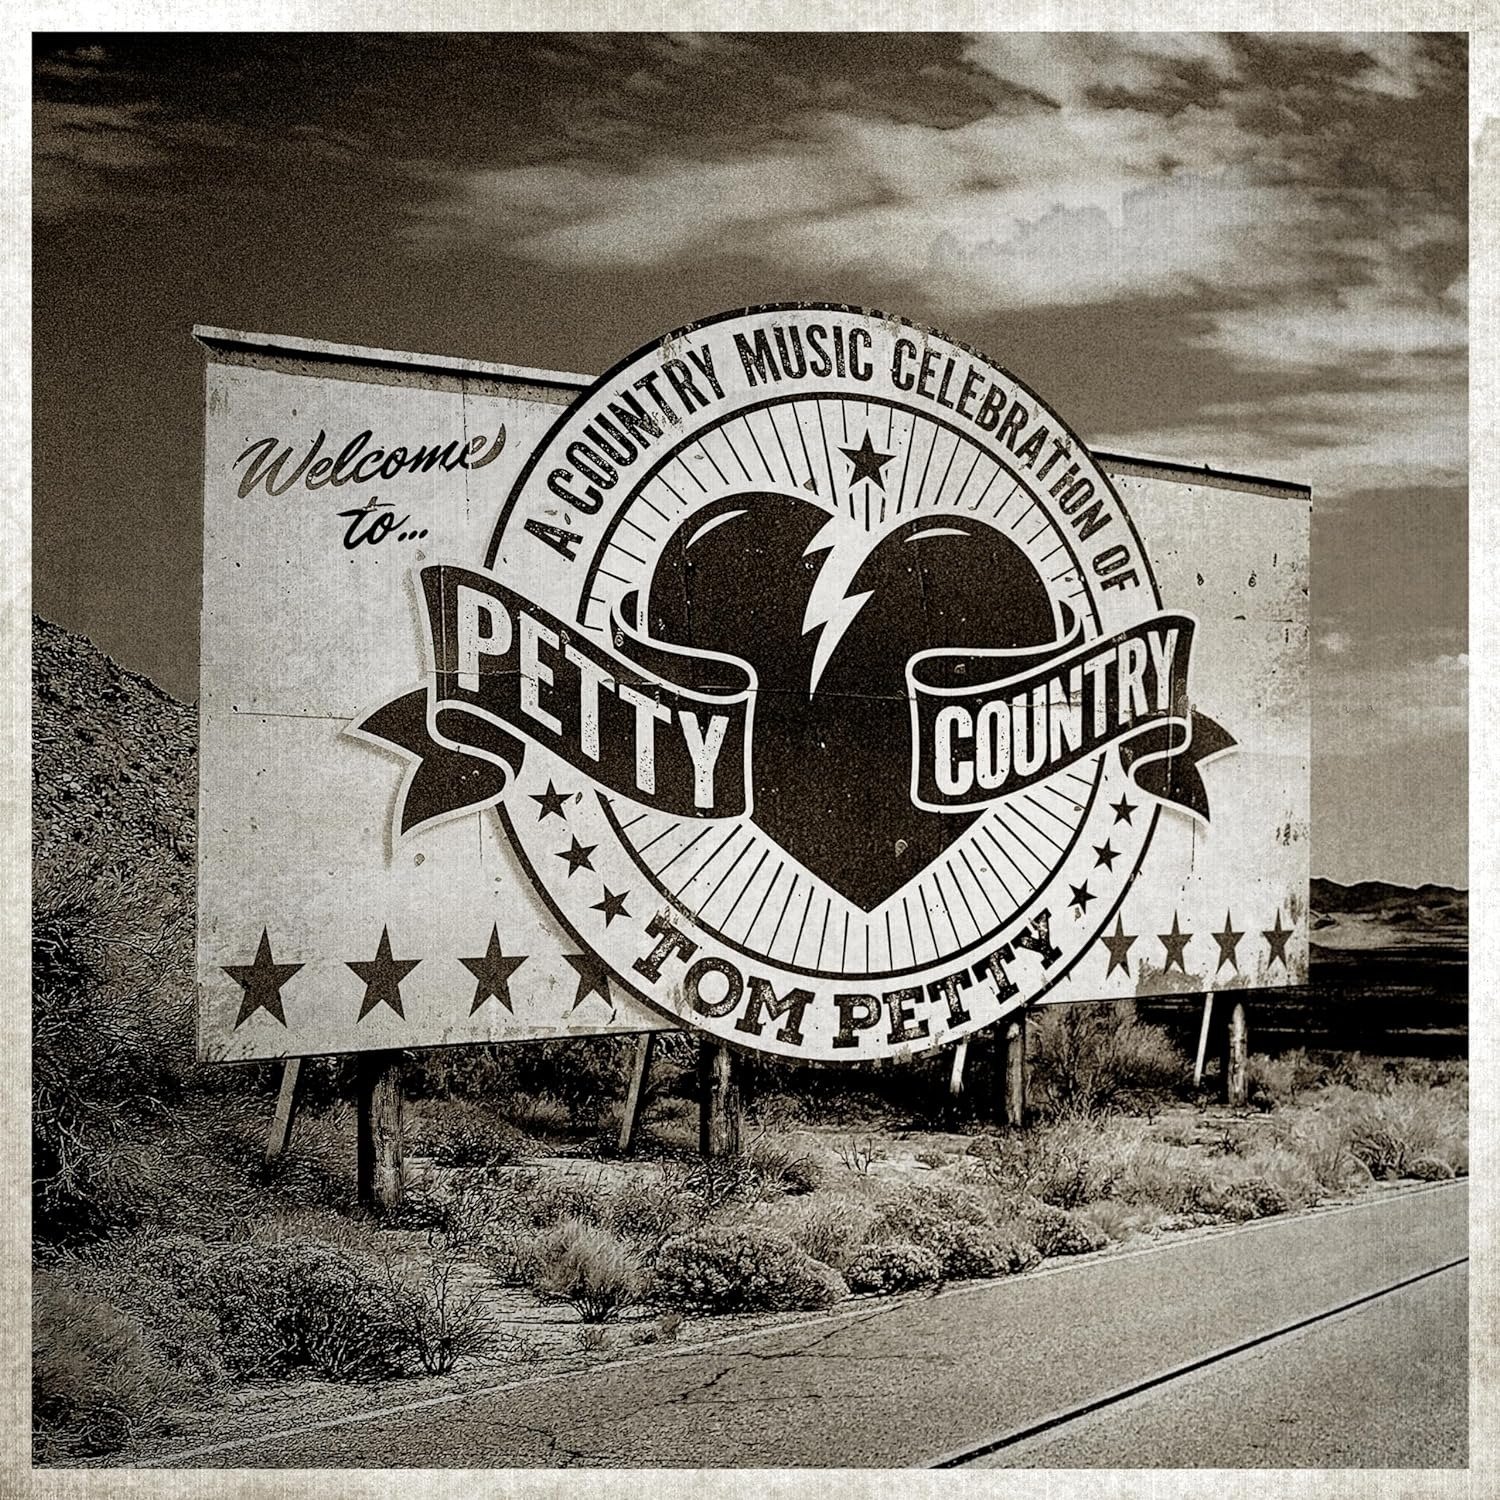 CD Shop - V/A PETTY COUNTRY: A COUNTRY MUSIC CELEBRATION OF TOM PETTY